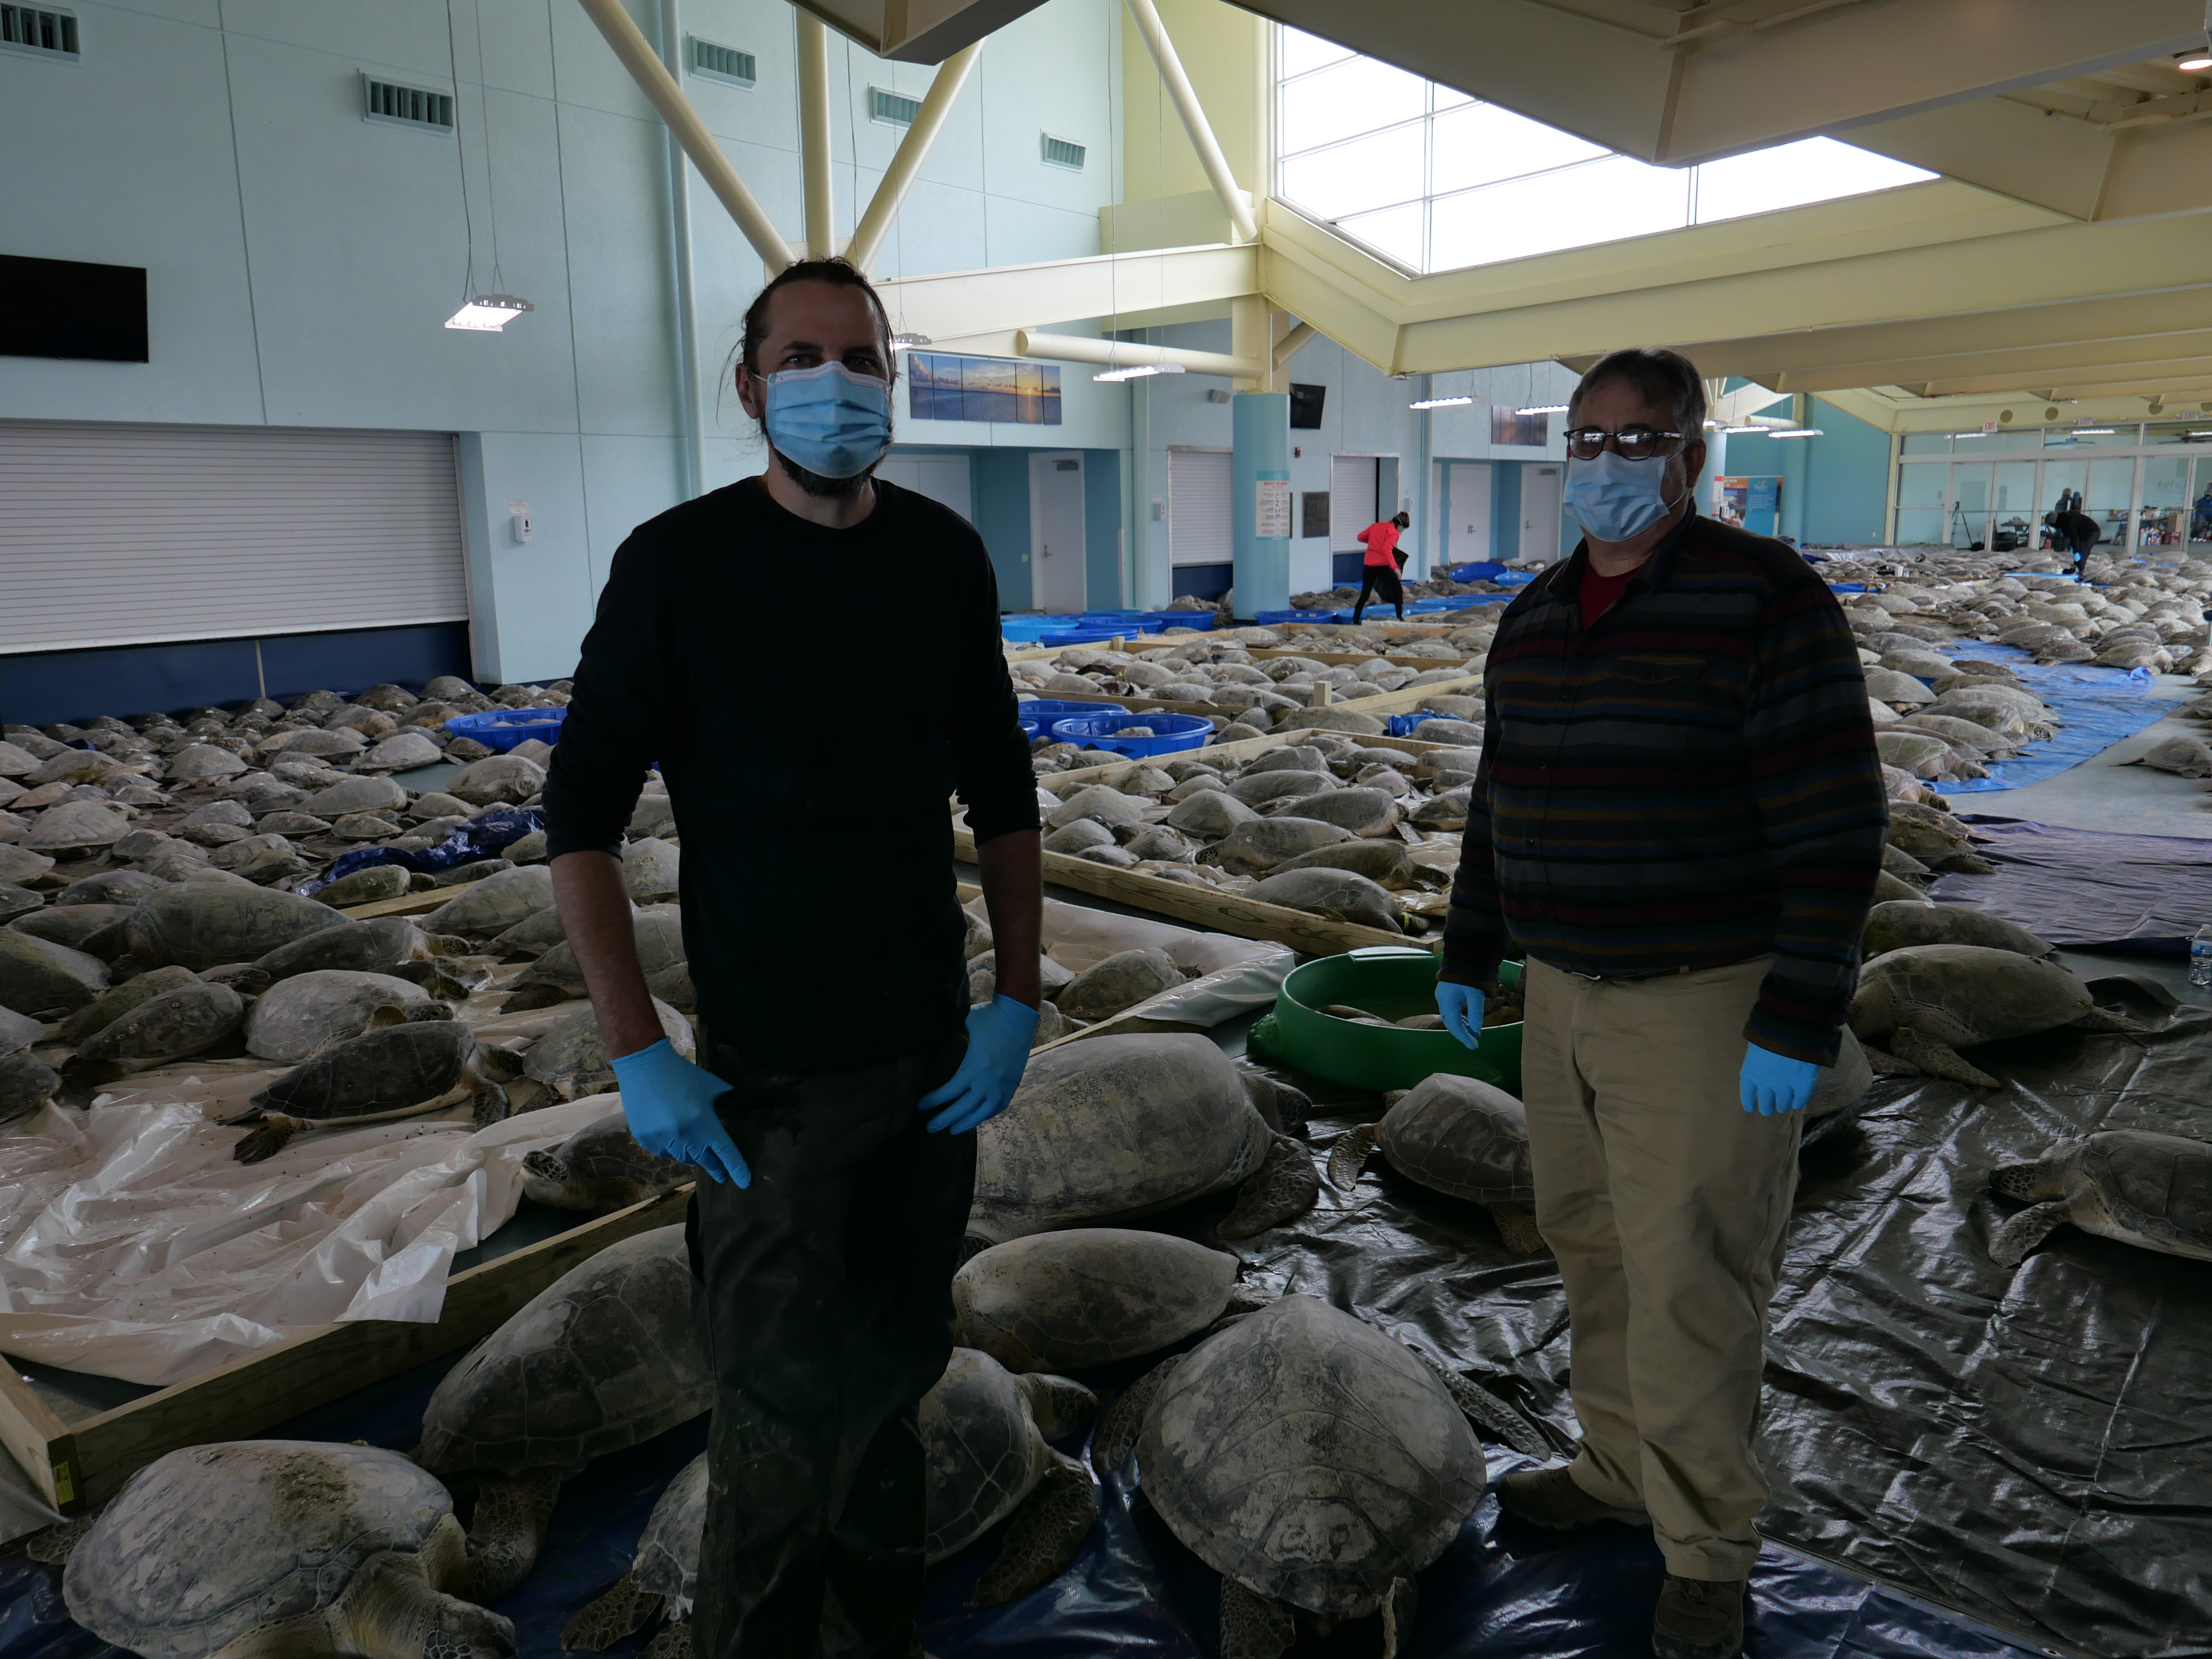 Image: Rescuing Thousands of Sea Turtles in Texas